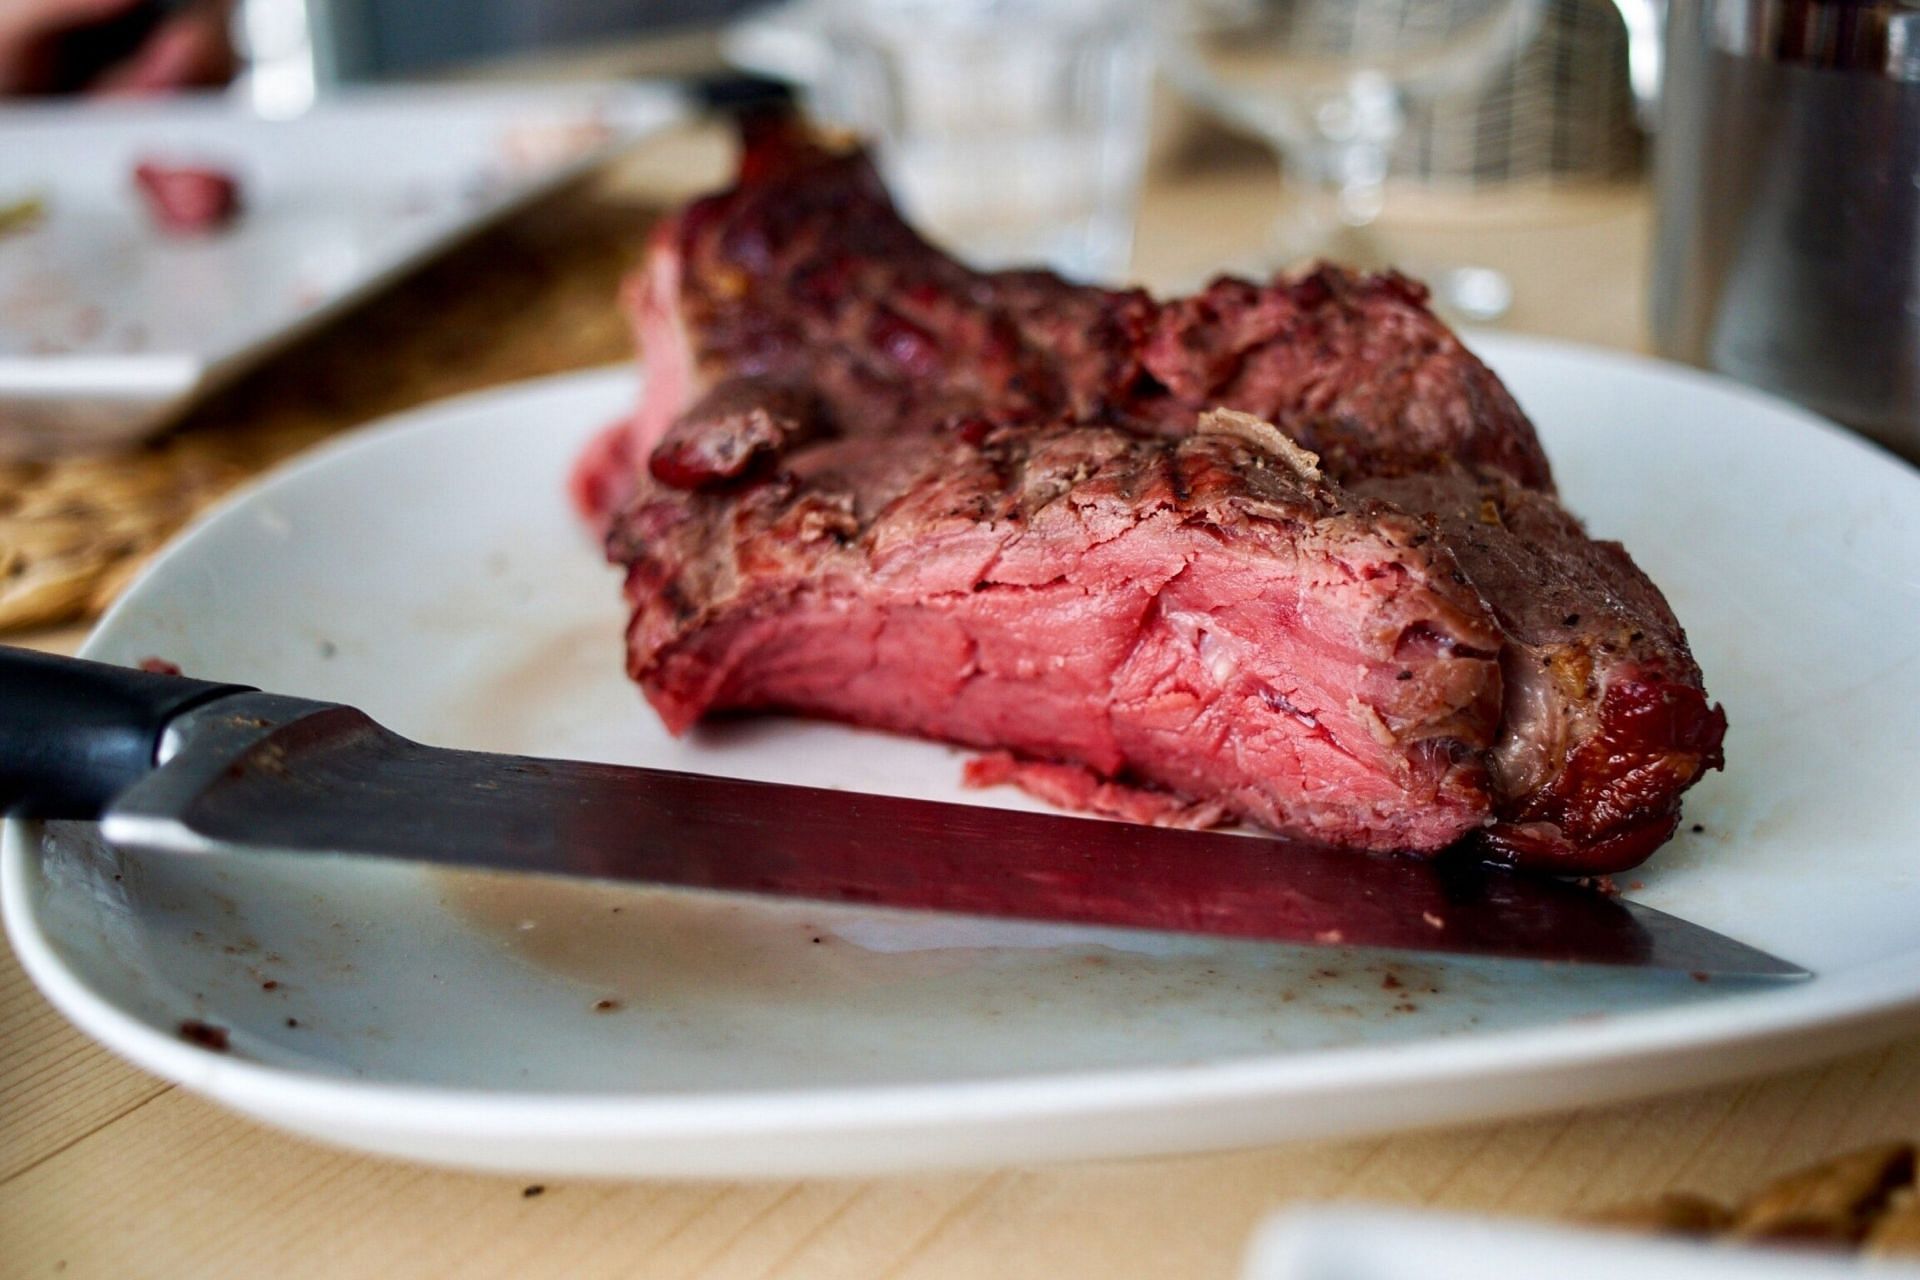 Red meat is an amazing source of protein and micronutrients. (Image via Unsplash/Sven Brandsma)